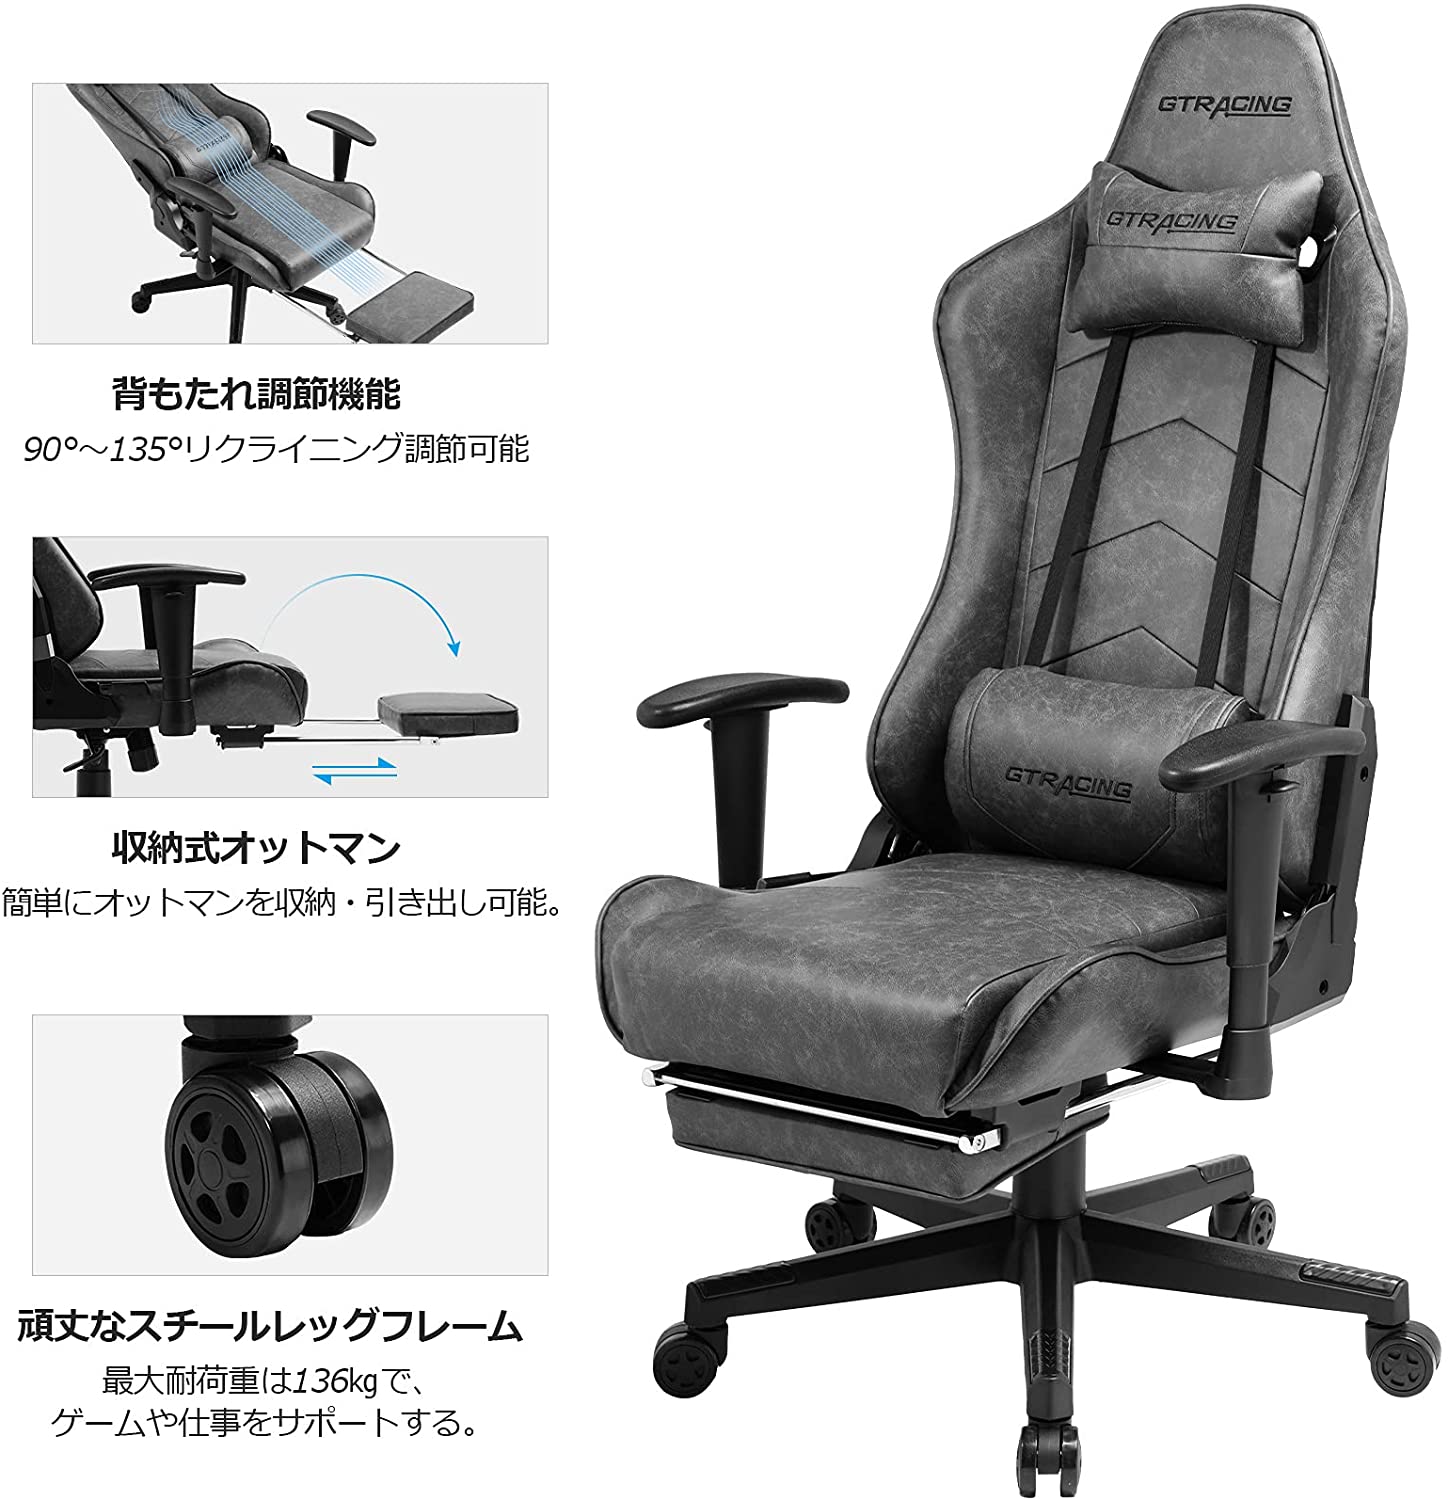 GT901-BLACK Gaming Chair with Footrest | GTRACING